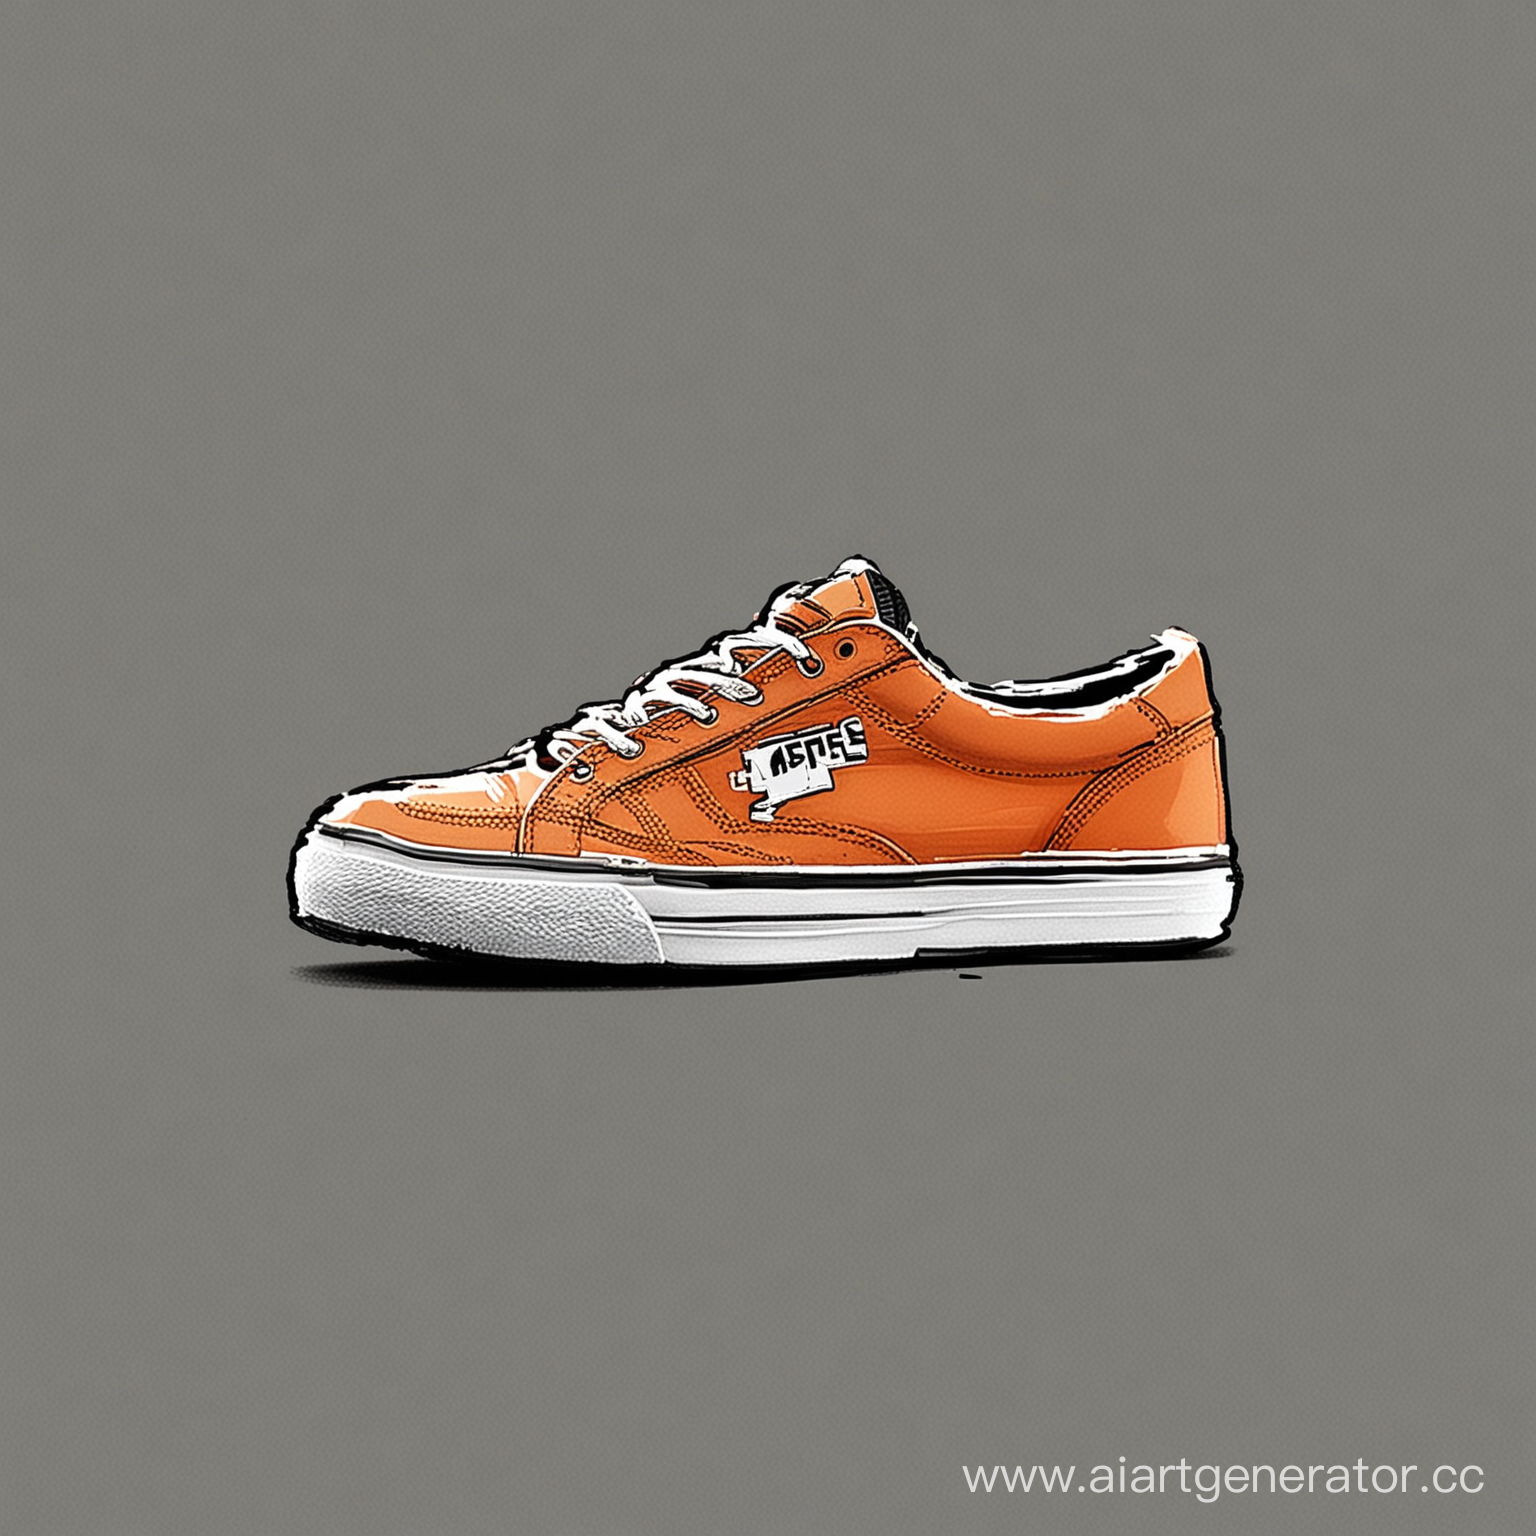 Create an avatar for the IFE sneaker store channel